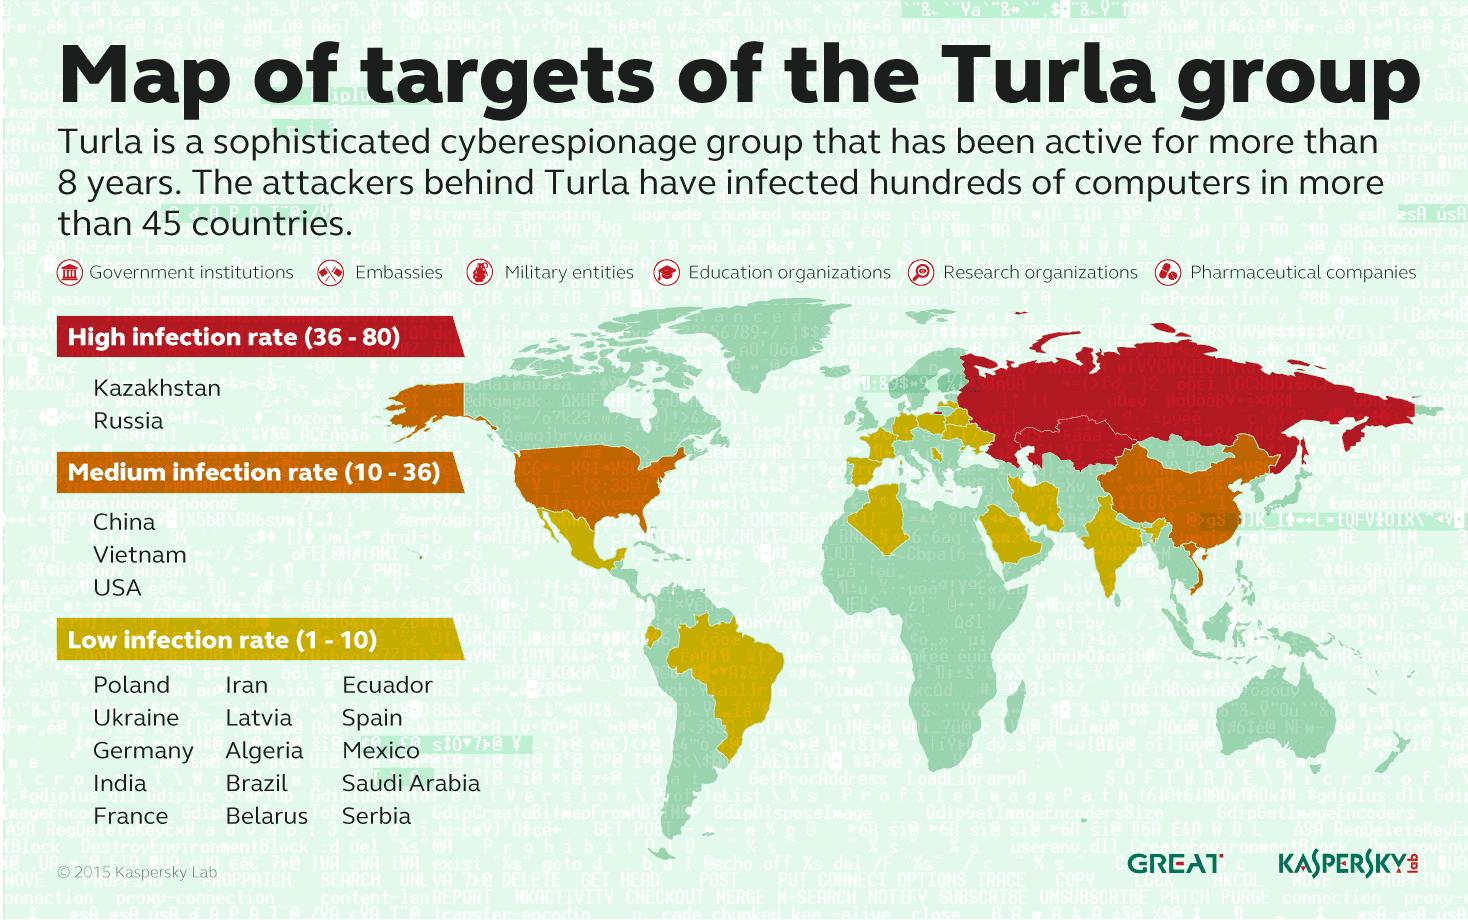 Turla_Map_of_Targets_final